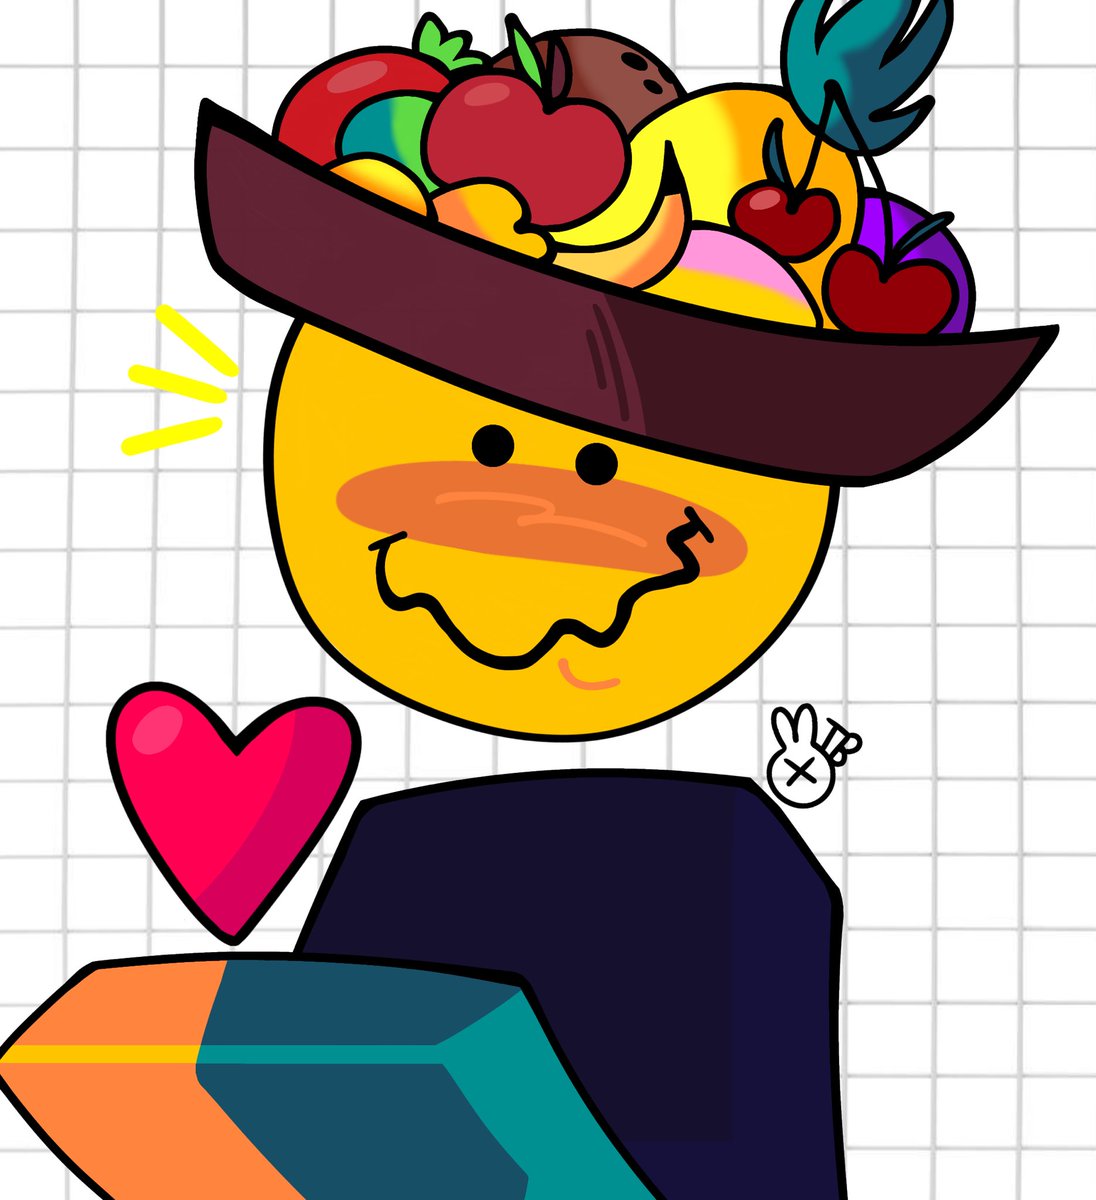 Art trade I did for @ABYSMALISM_ proud of this one !! :3 #robloxart #art #roblox #fanart #arttrade